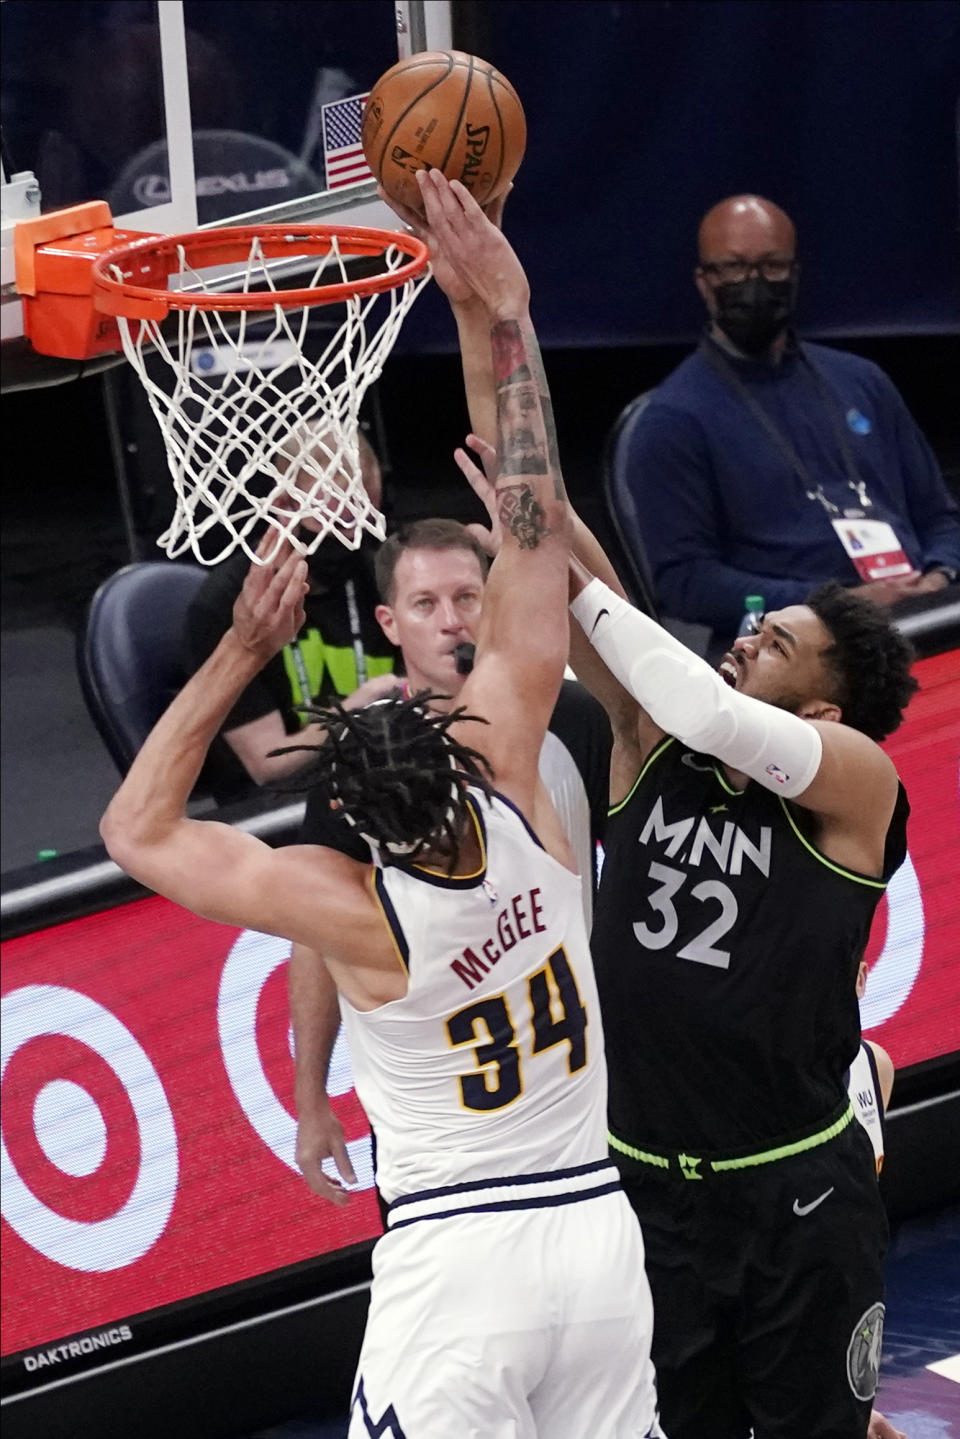 Denver Nuggets' JaVale McGee (34) breaks up a layup attempt by Minnesota Timberwolves' Karl-Anthony Towns (32) during the first half of an NBA basketball game Thursday, May 13, 2021, in Minneapolis. (AP Photo/Jim Mone)